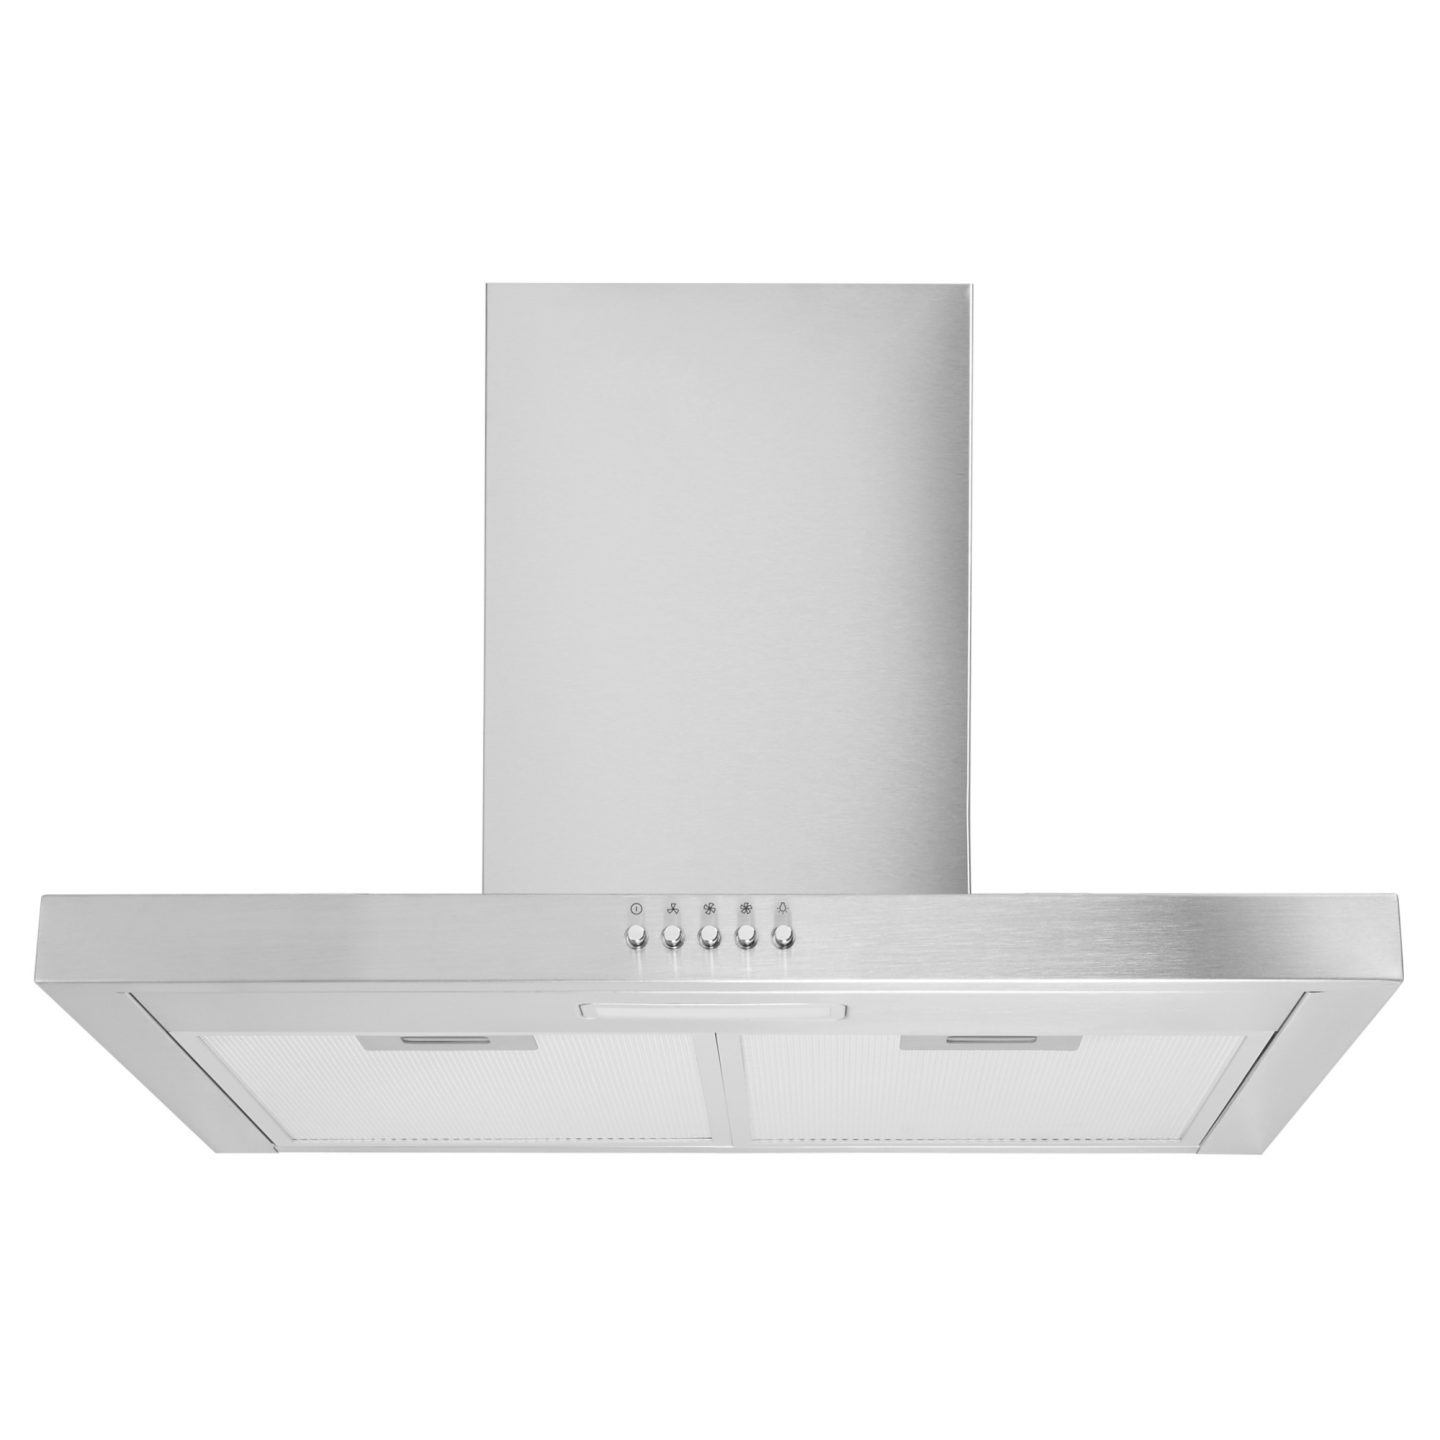 Cookology 60cm Angled Stainless Steel Chimney Kitchen Cooker Hood & Ducting 